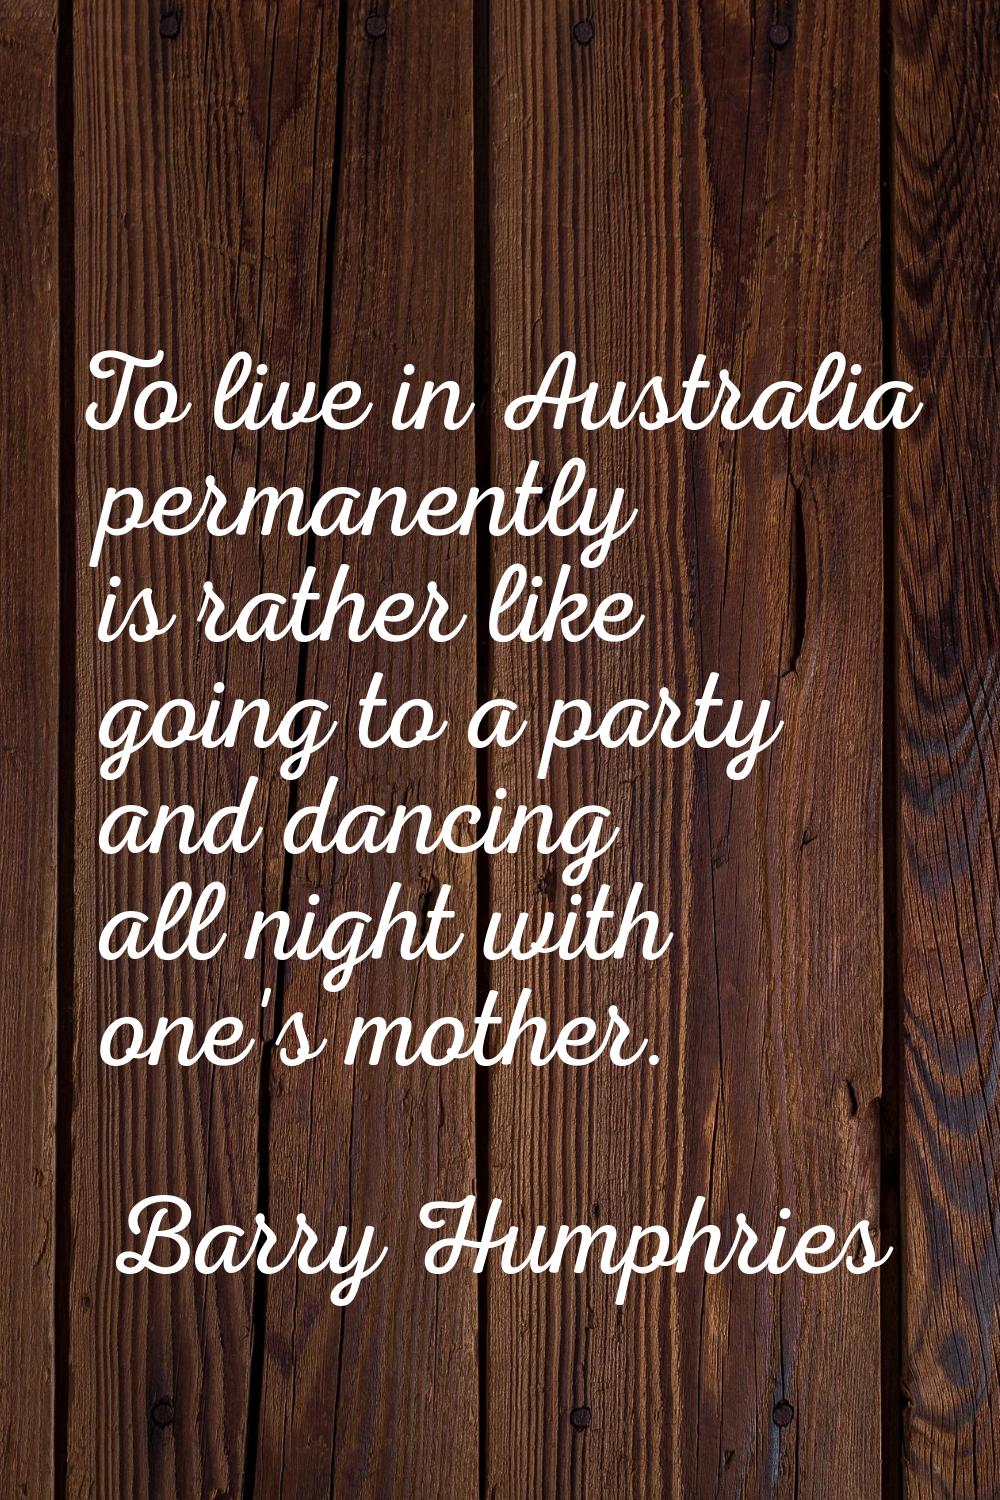 To live in Australia permanently is rather like going to a party and dancing all night with one's m